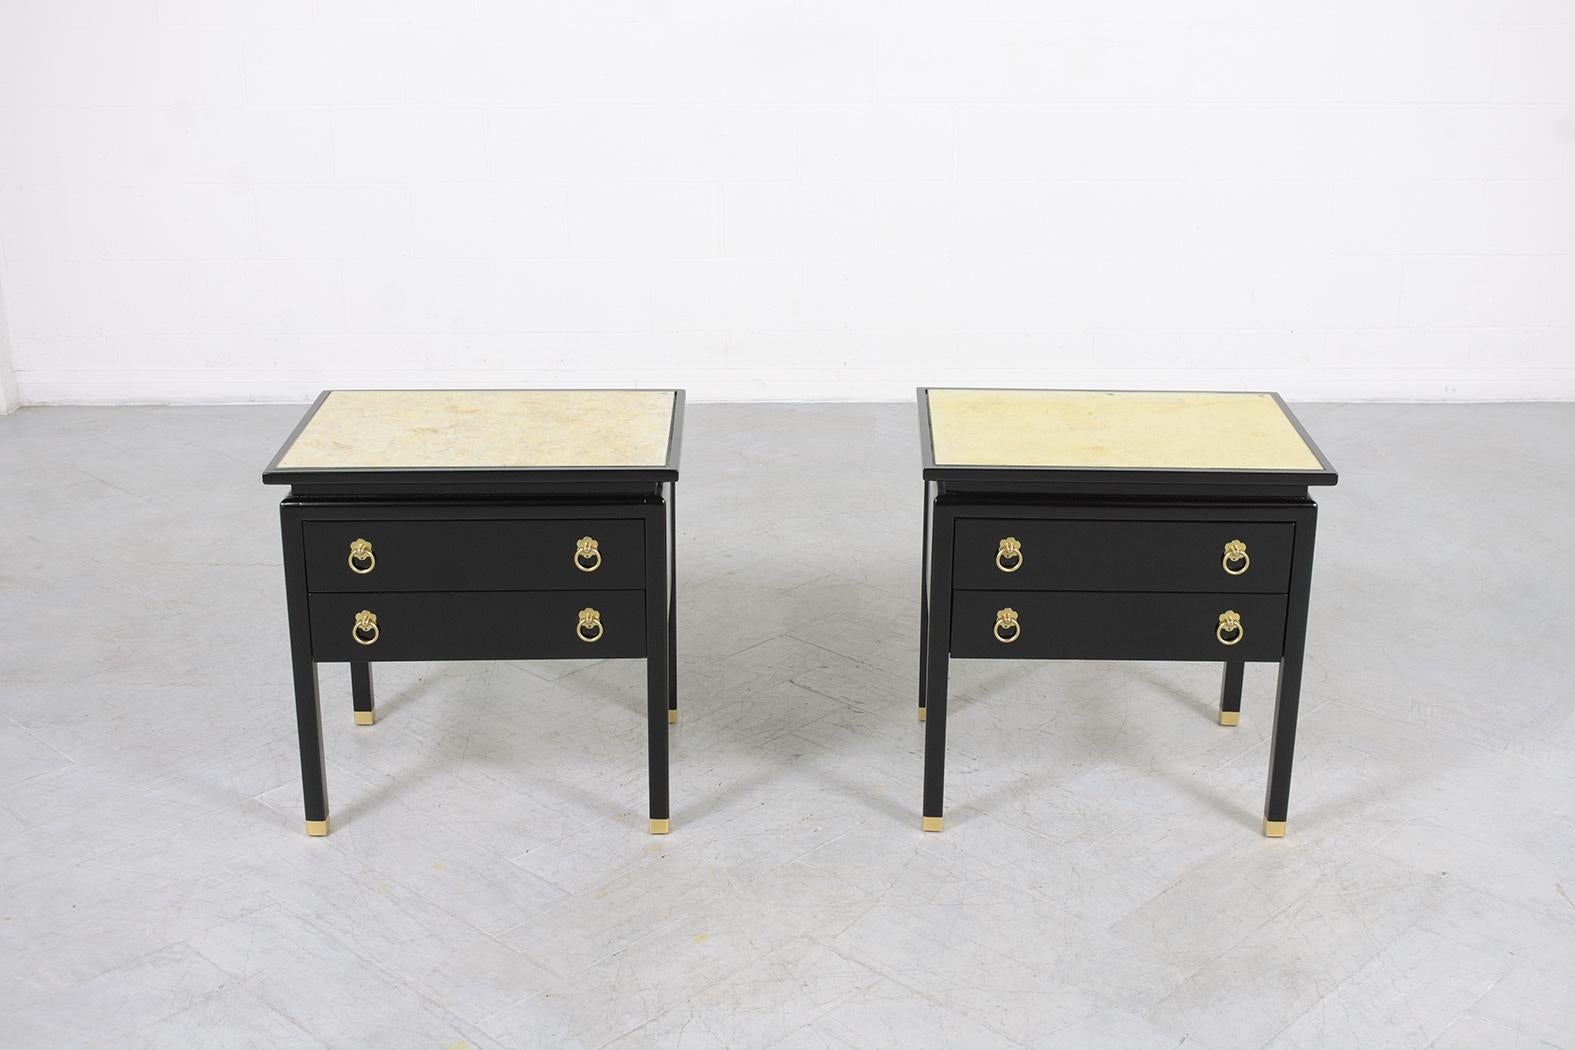 This pair of American of Martinsville Mid-Century Modern bedside tables are in great condition beautifully hand-crafted out of walnut and completely restored and refinished by our professional craftsmen team, this pair of fabulous pair of 1960s